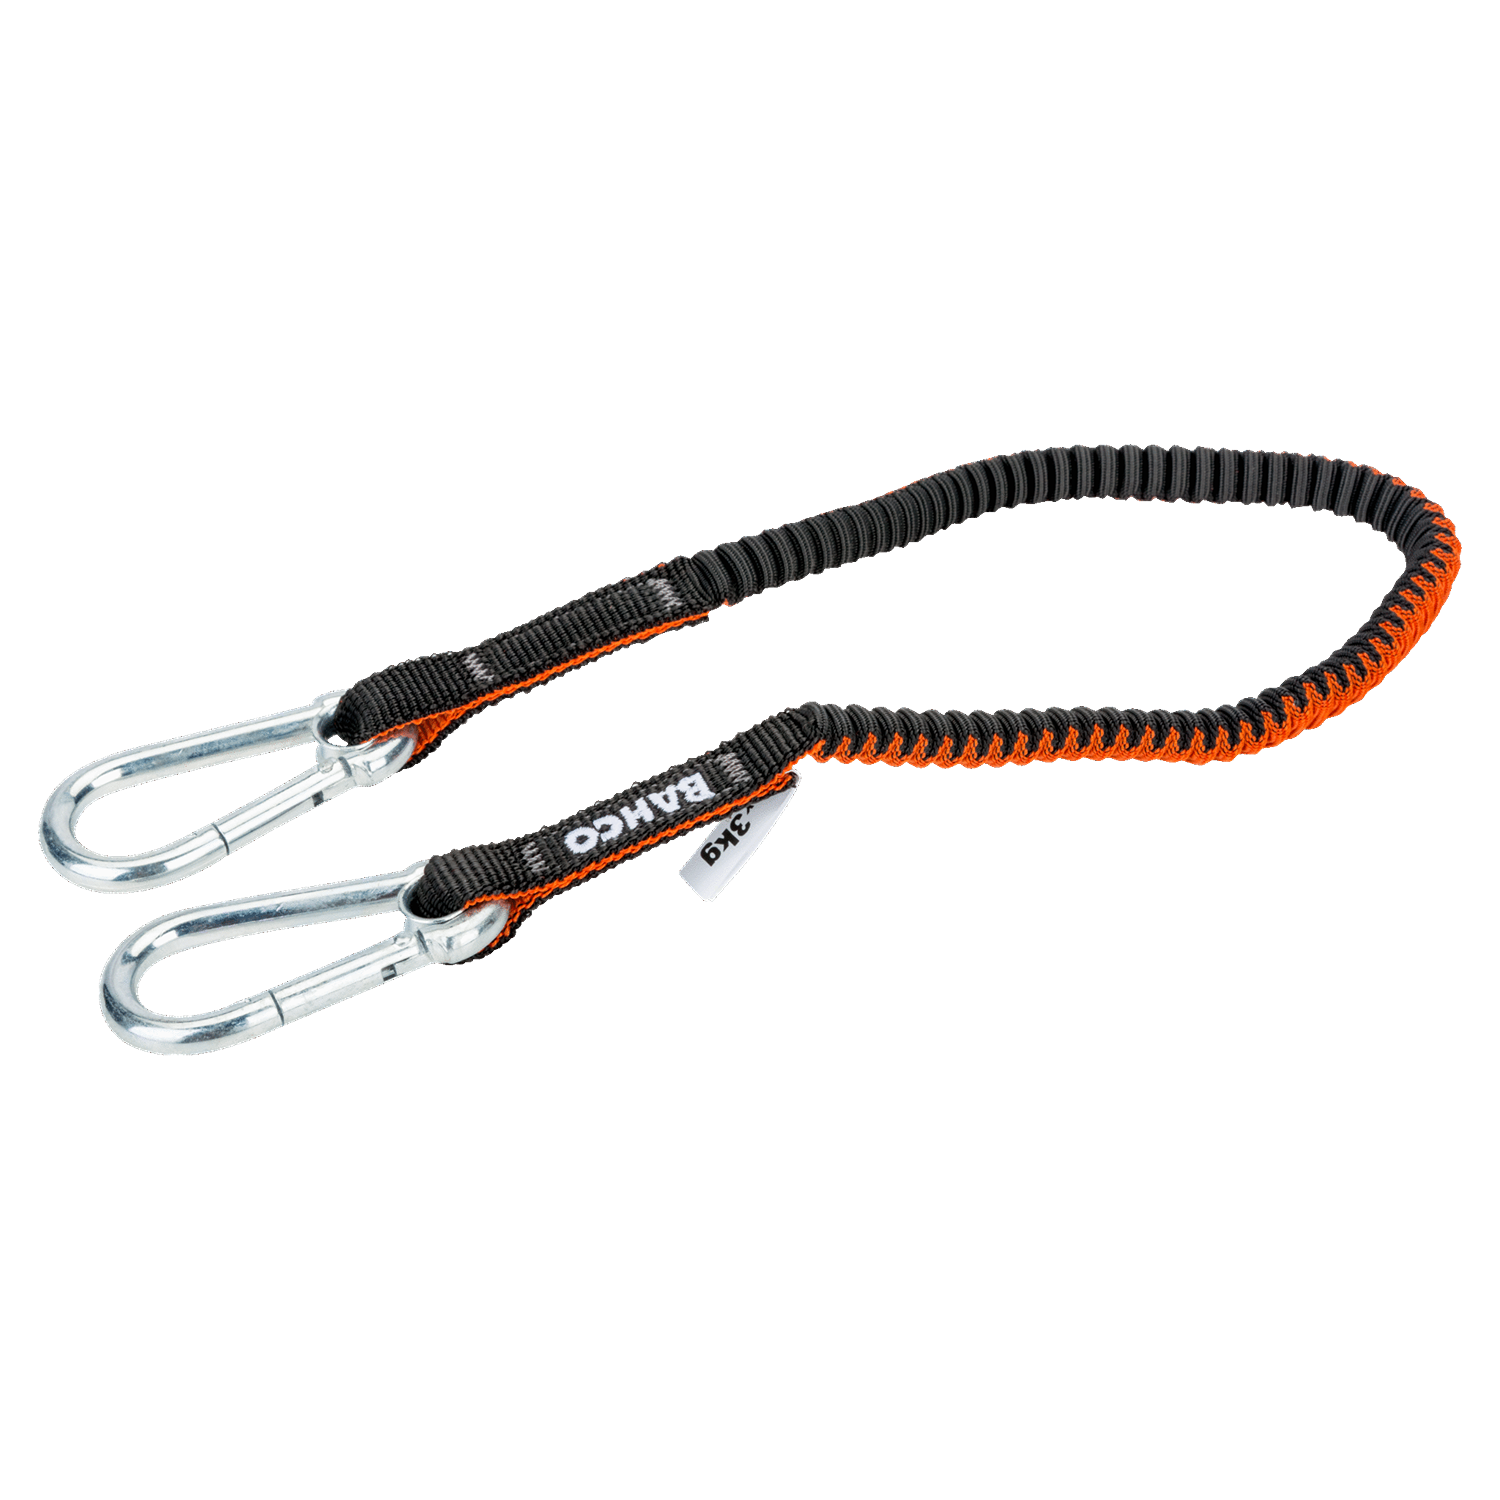 BAHCO 3875-LY1 Strap Lanyard with Fixed Carabiner 3 kg - Premium Lanyard from BAHCO - Shop now at Yew Aik.